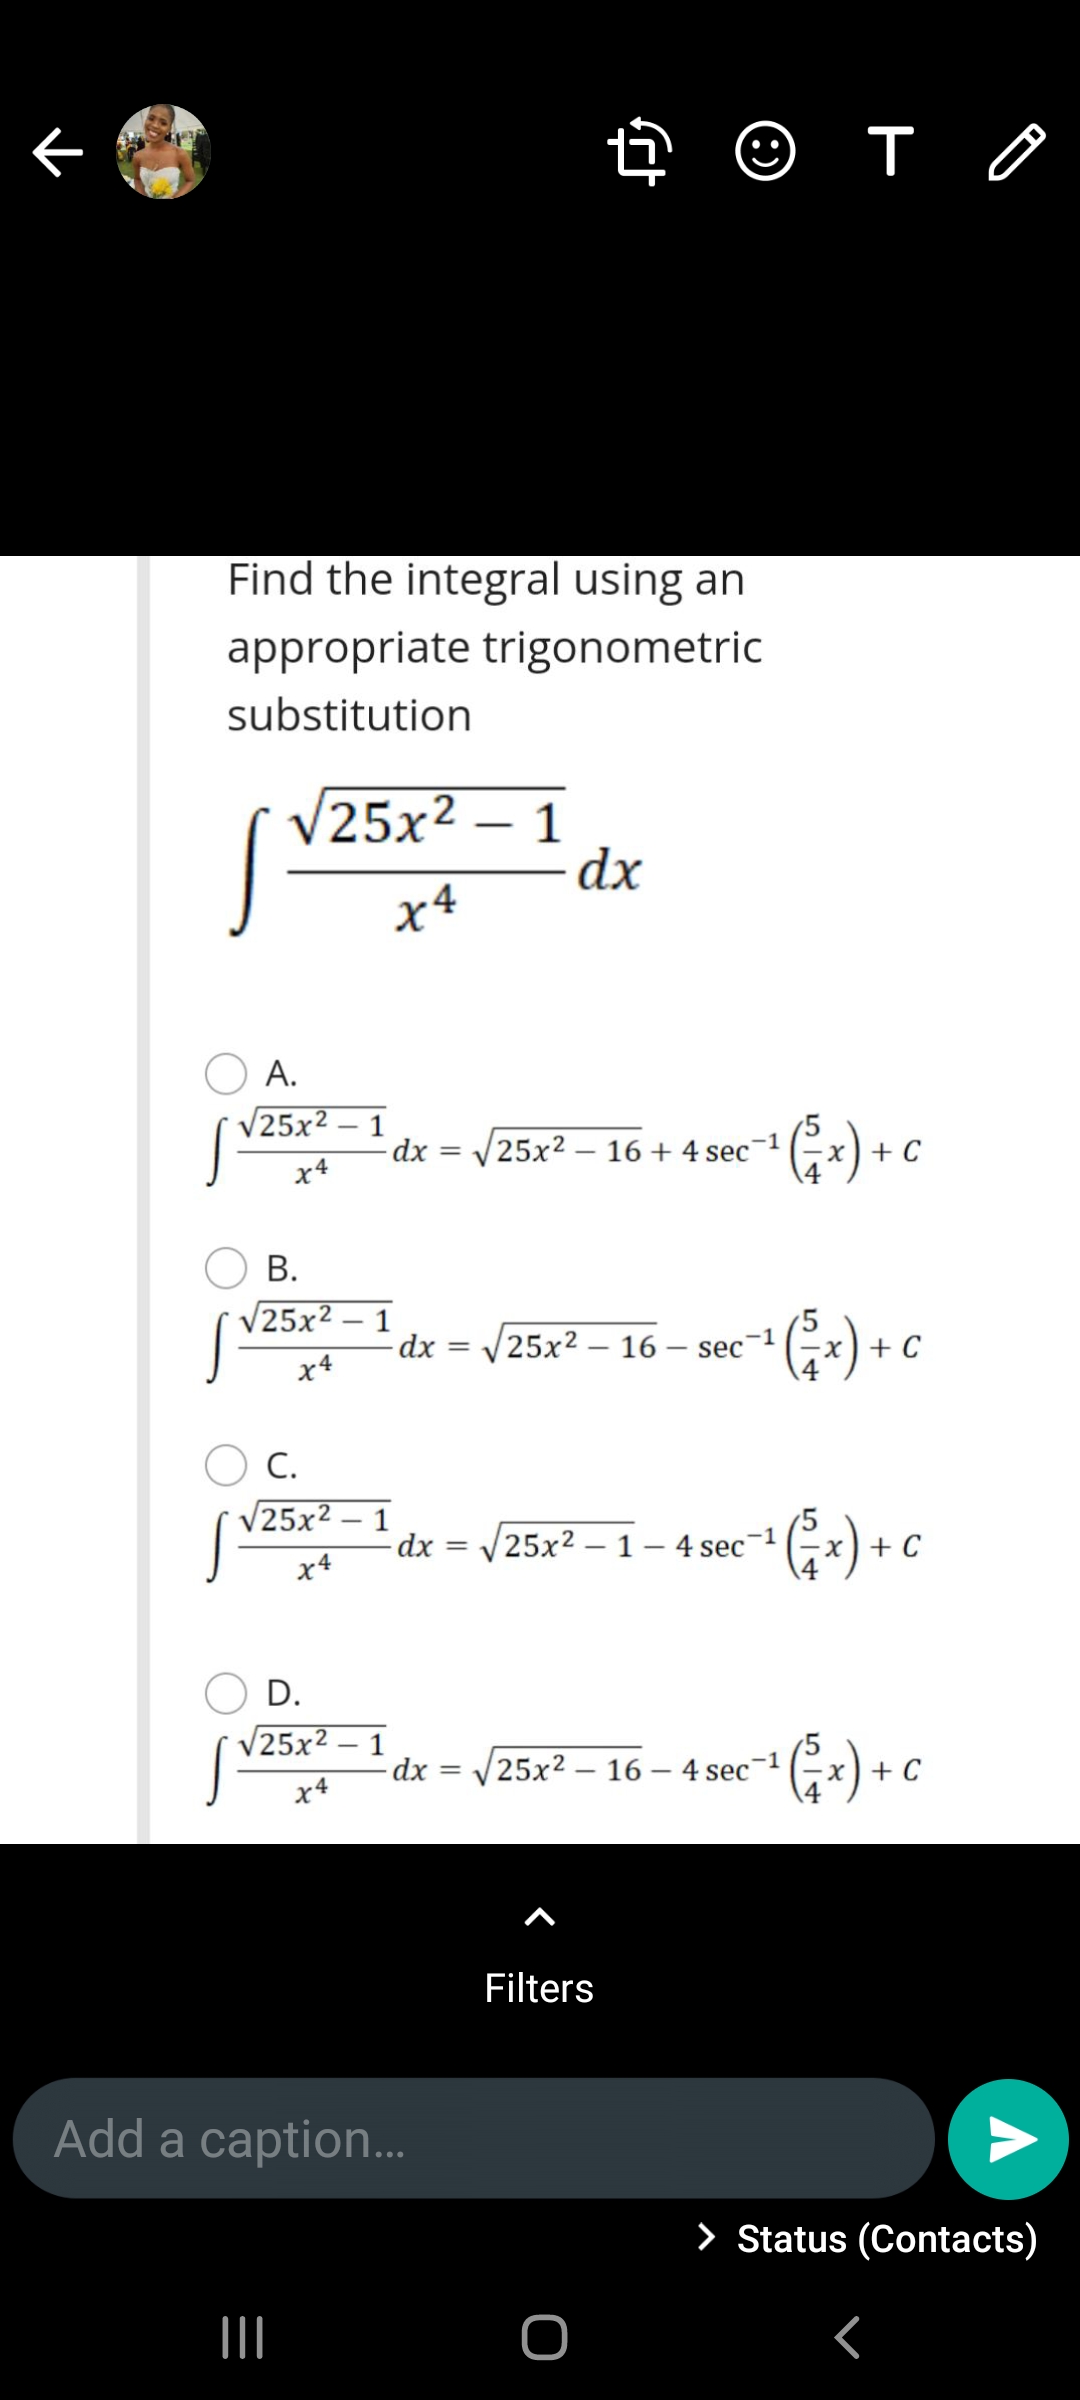 Find the integral using an
appropriate trigonometric
substitution
V25x2 – 1
dx
-
X4
А.
V25x² – 1
dx =
25x2 – 16 + 4 sec
x) + C
(4
x4
В.
V25x²
1
dx = 25x2 – 16 – sec
G-)
-1
+ C
x4
С.
V25x2 – 1
G-) +c
-1
dx = 25x2 – 1– 4 sec
x4
D.
V25x²
|
dx = /25x2 – 16 – 4 sec
+ C
%3|
x4
Filters
Add a caption.
> Status (Contacts)
